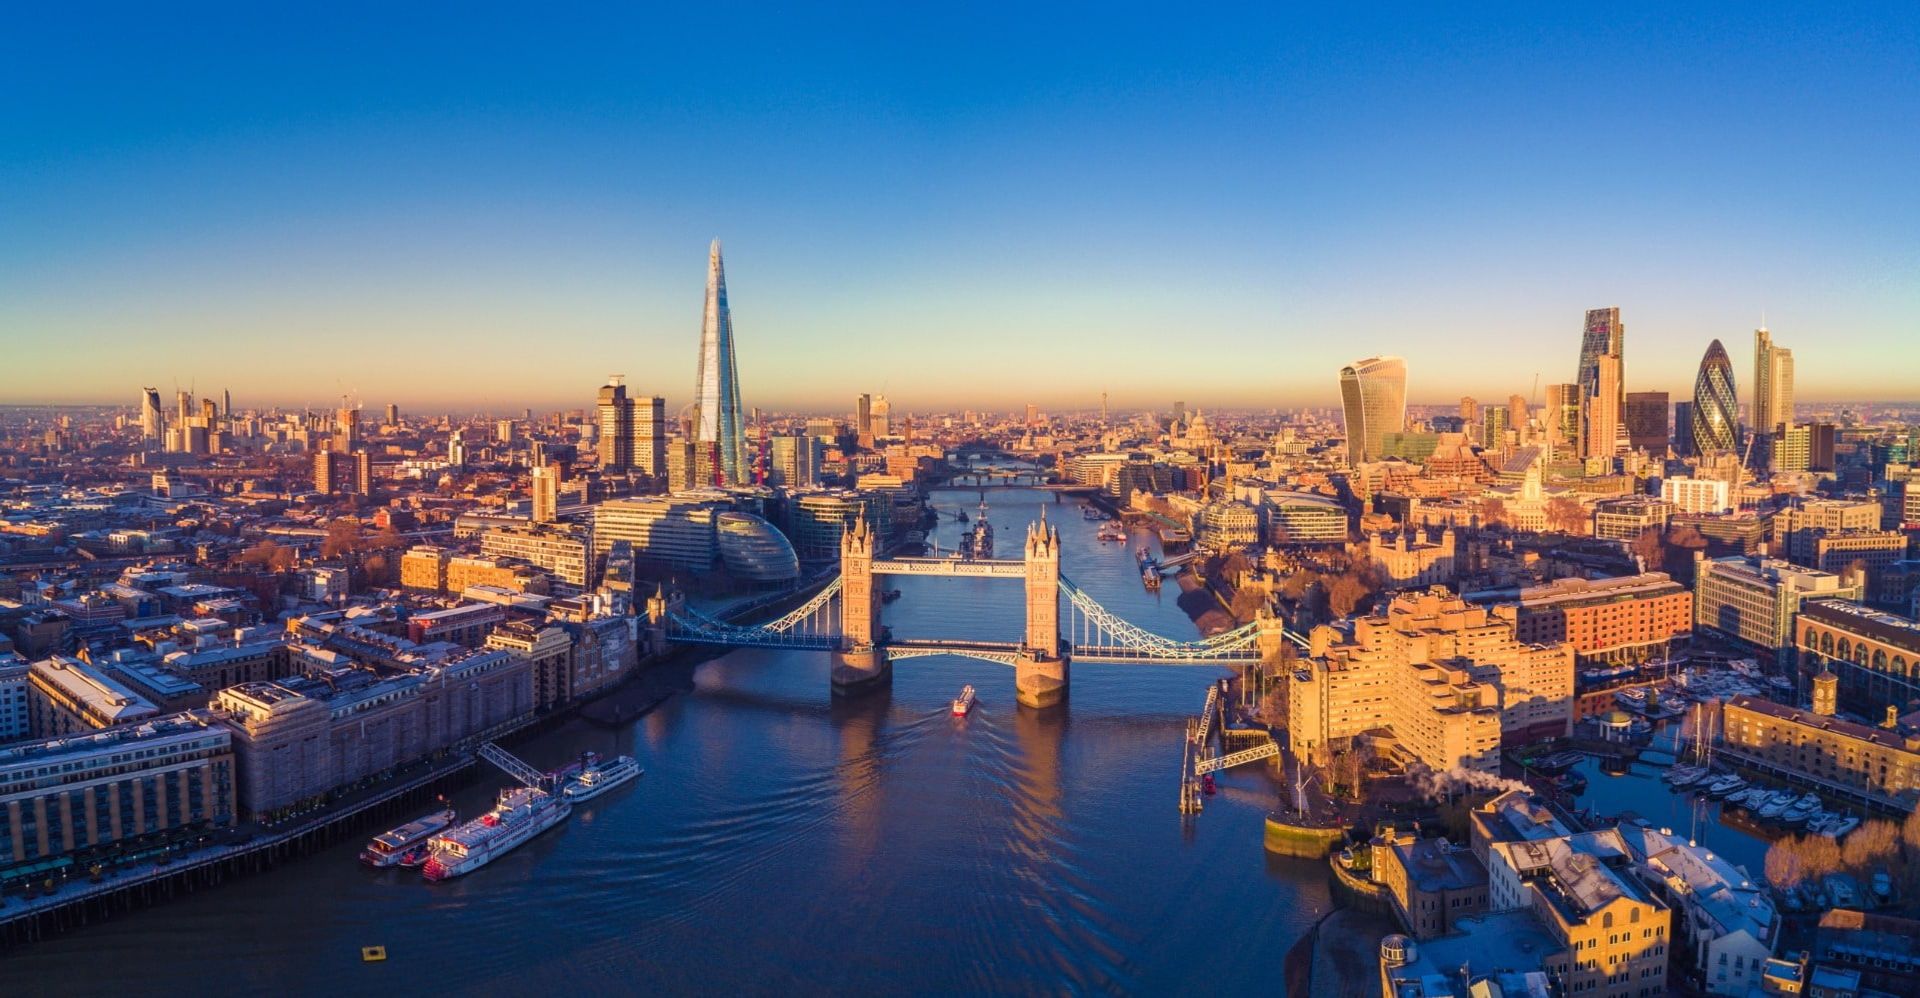 London is at the heart of the life science and ATMP industry and Next Phase Recruitment attend events that are often held in London. You can find a new job in life sciences and a career in cell therapy if you attend the Advanced Therapies conference in London in October 2021